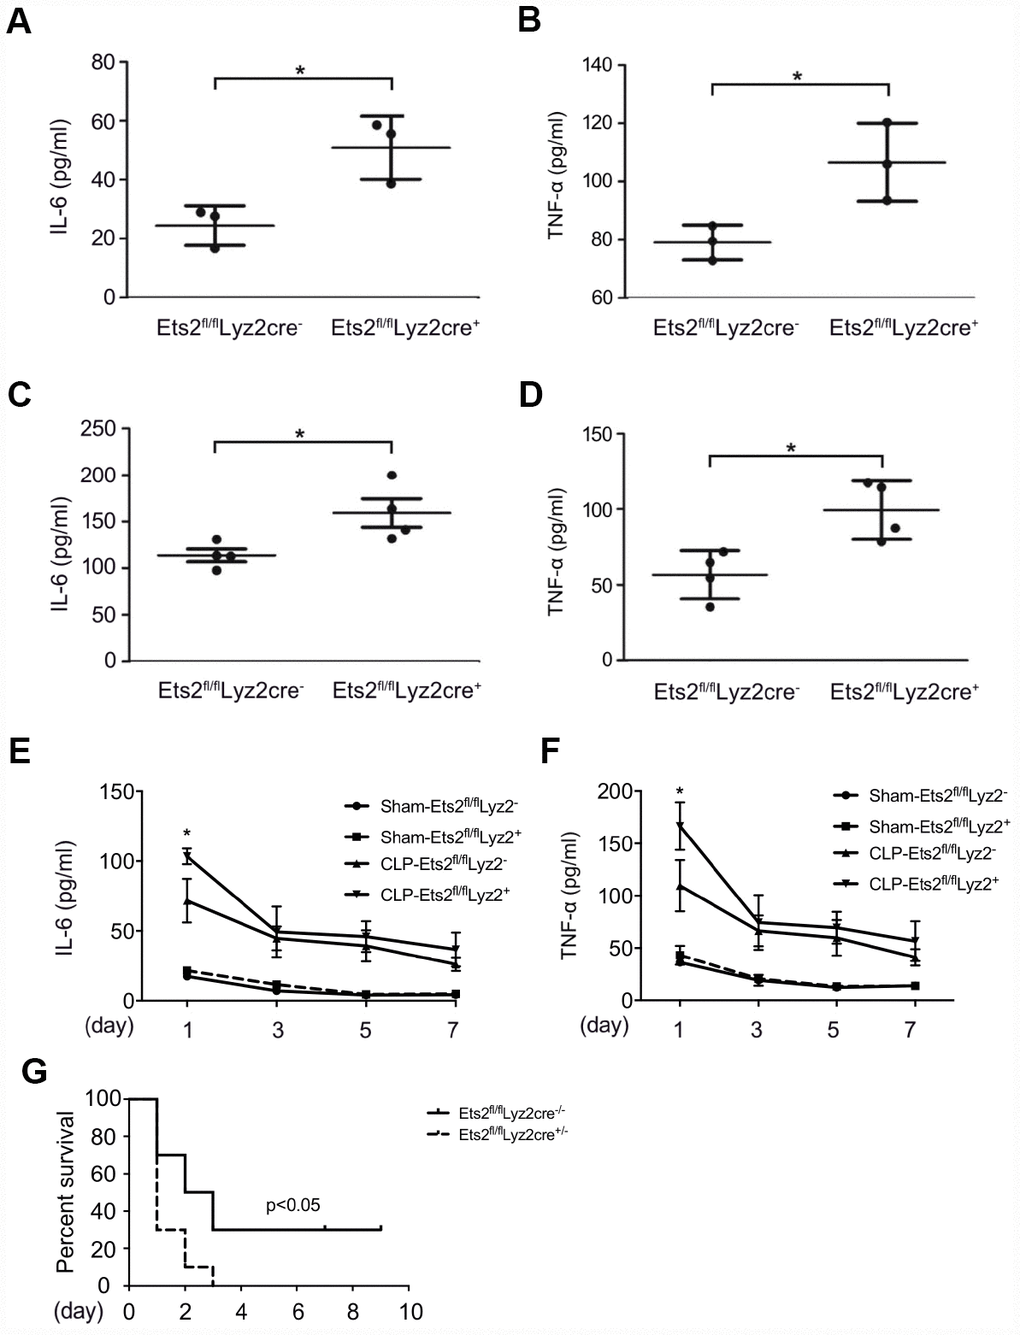 Ets2 inhibits LPS-induced IL-6 and TNF-α production and improves the survival of CLP-induced sepsis in vivo. (A, B) ELISA assay of IL-6 (A) and TNF-α (B) in the serum of Ets2fl/flLyz2cre− or Ets2fl/flLyz2cre+ mice, intraperitoneally injected with LPS (1 μg/g body weight) for 5 h (n=3 per phenotype). (C, D) ELISA assay of IL-6 (C) and TNF-α (D) in the serum of Ets2fl/flLyz2cre− or Ets2fl/flLyz2cre+ mice at 6 h after CLP surgery (n=4 per phenotype). (E–G) Continuous IL-6 (E) and TNF-α (F) at postoperative day 1, 3, 5, 7, and survival rate (G) of Ets2fl/flLyz2cre− or Ets2fl/flLyz2cre+ mice given CLP or Sham surgery (n=10 per phenotype). Data are shown as the mean ± s.e.m. Student’s t-test compared with the Ets2fl/flLyz2cre- group for ELISA experiments. A log-rank test was used for survival data. *, P